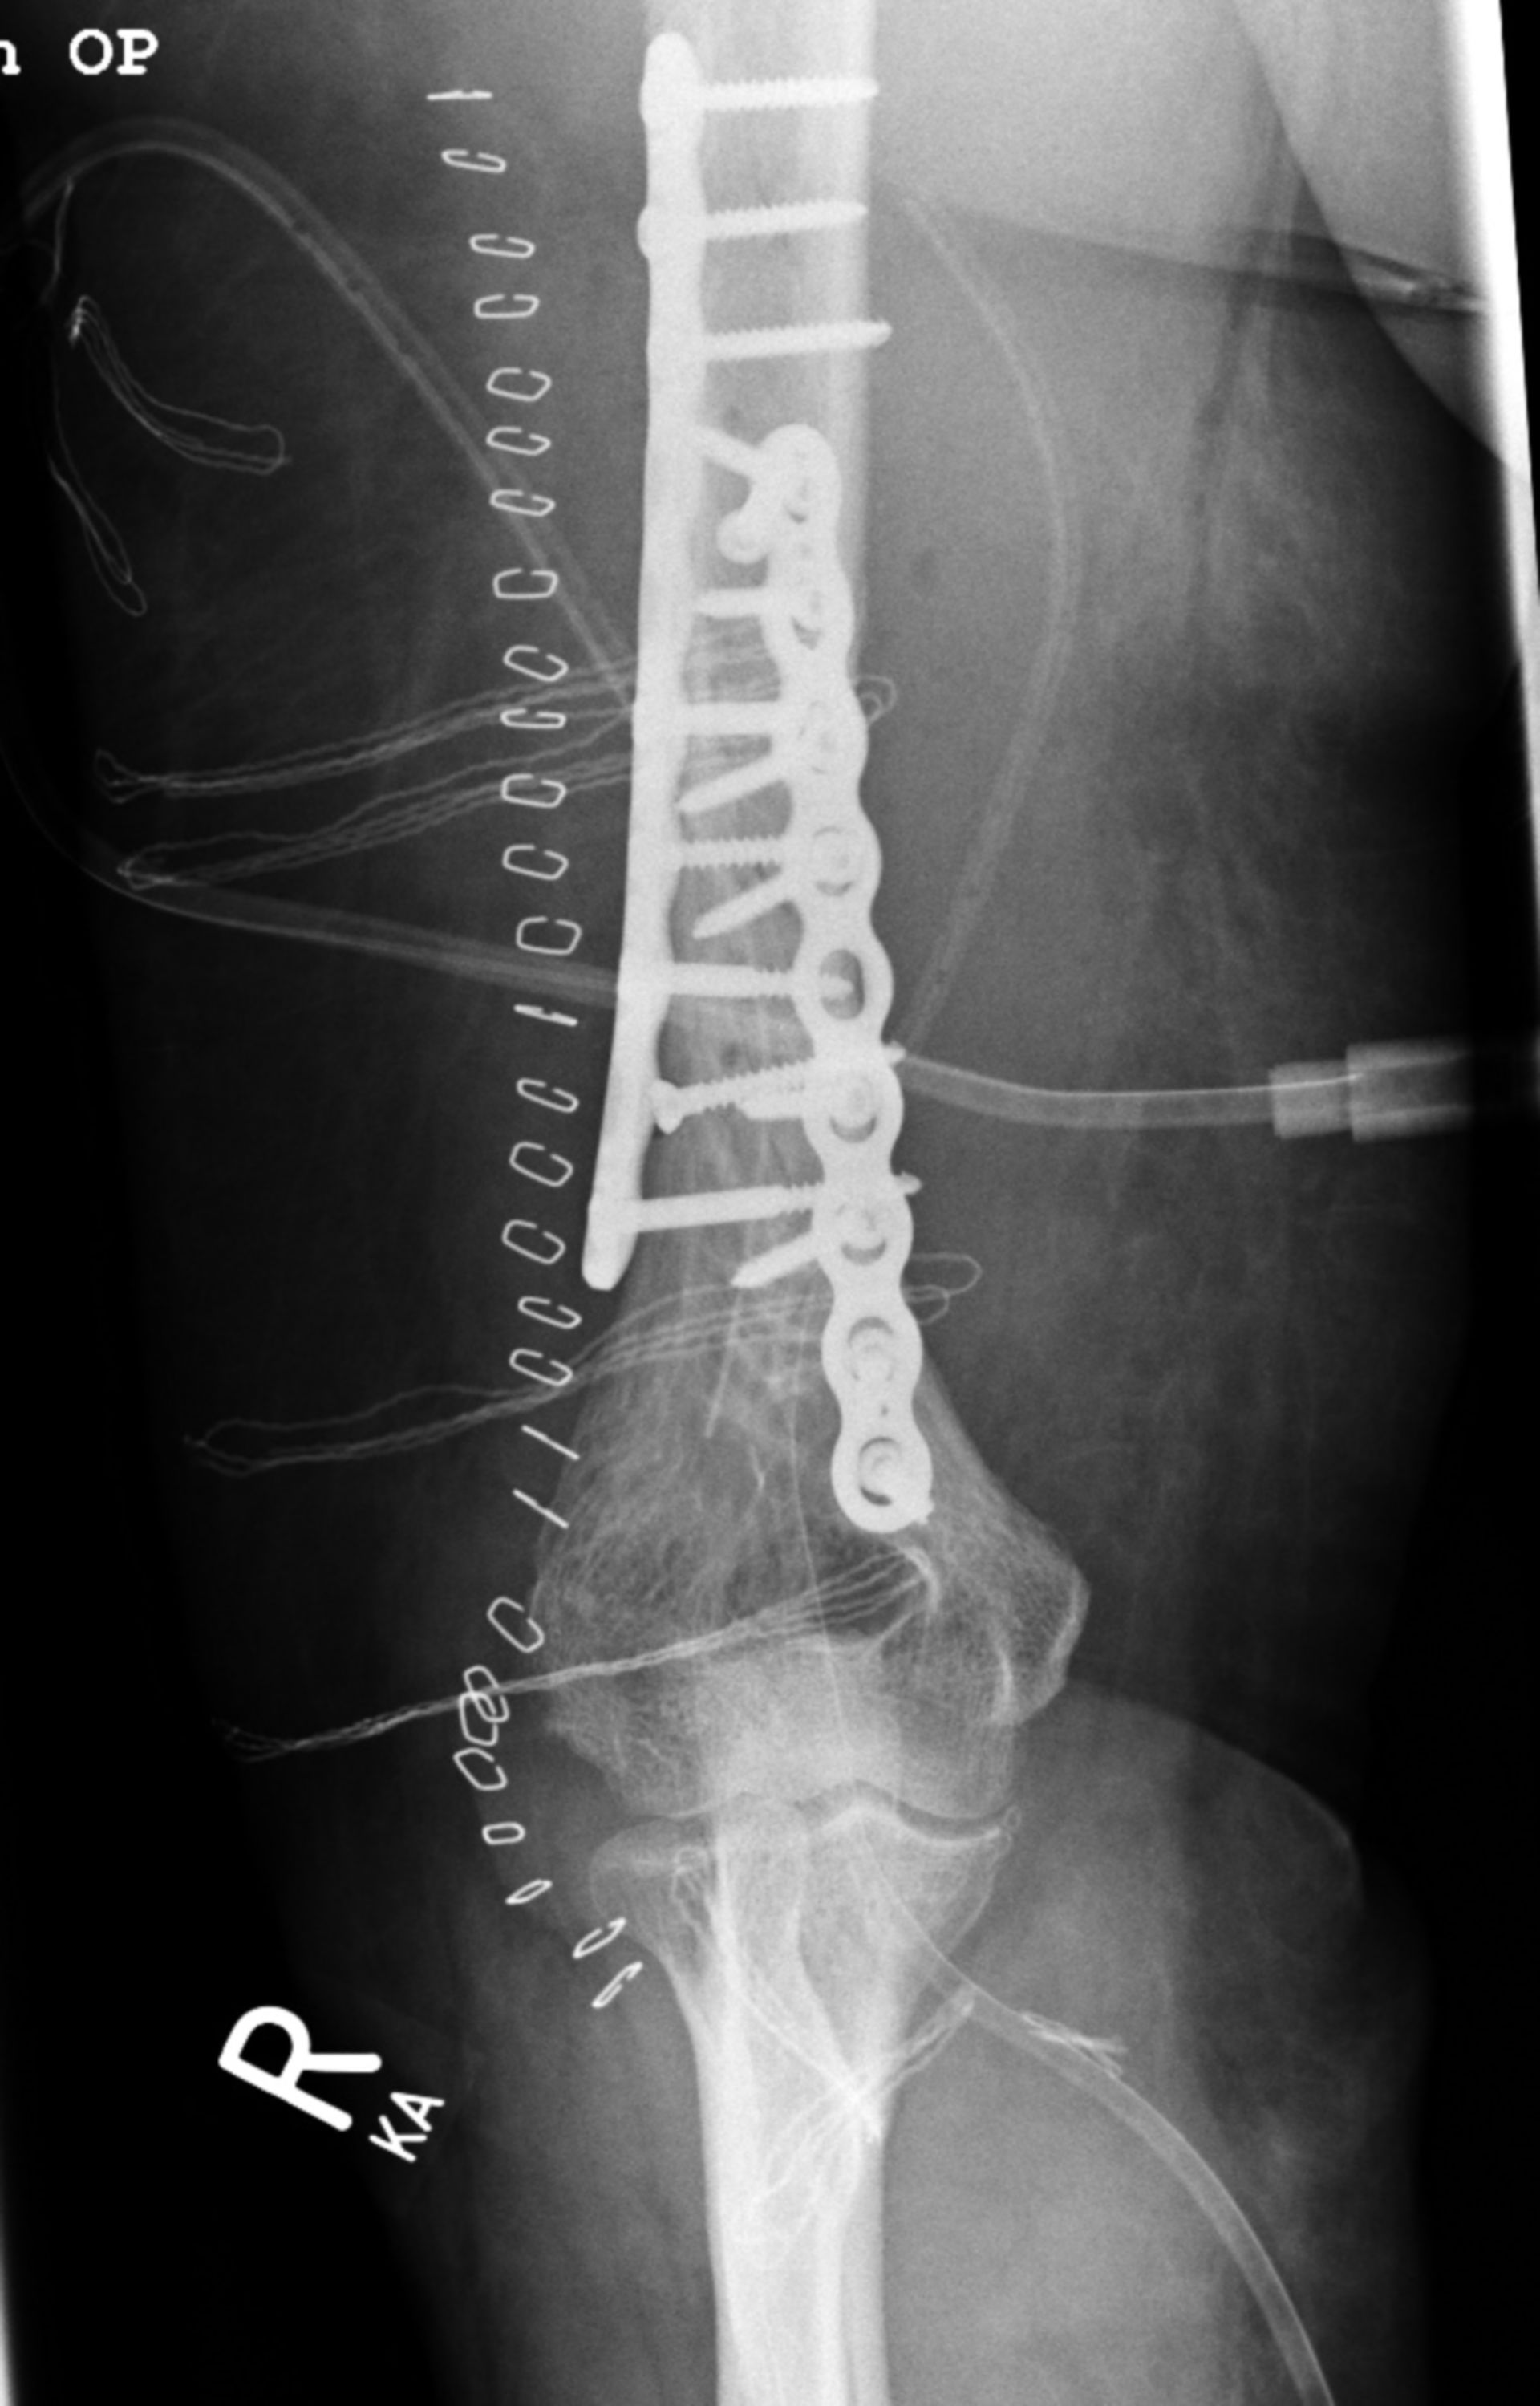 Supracondylar humerus fracture - after surgery